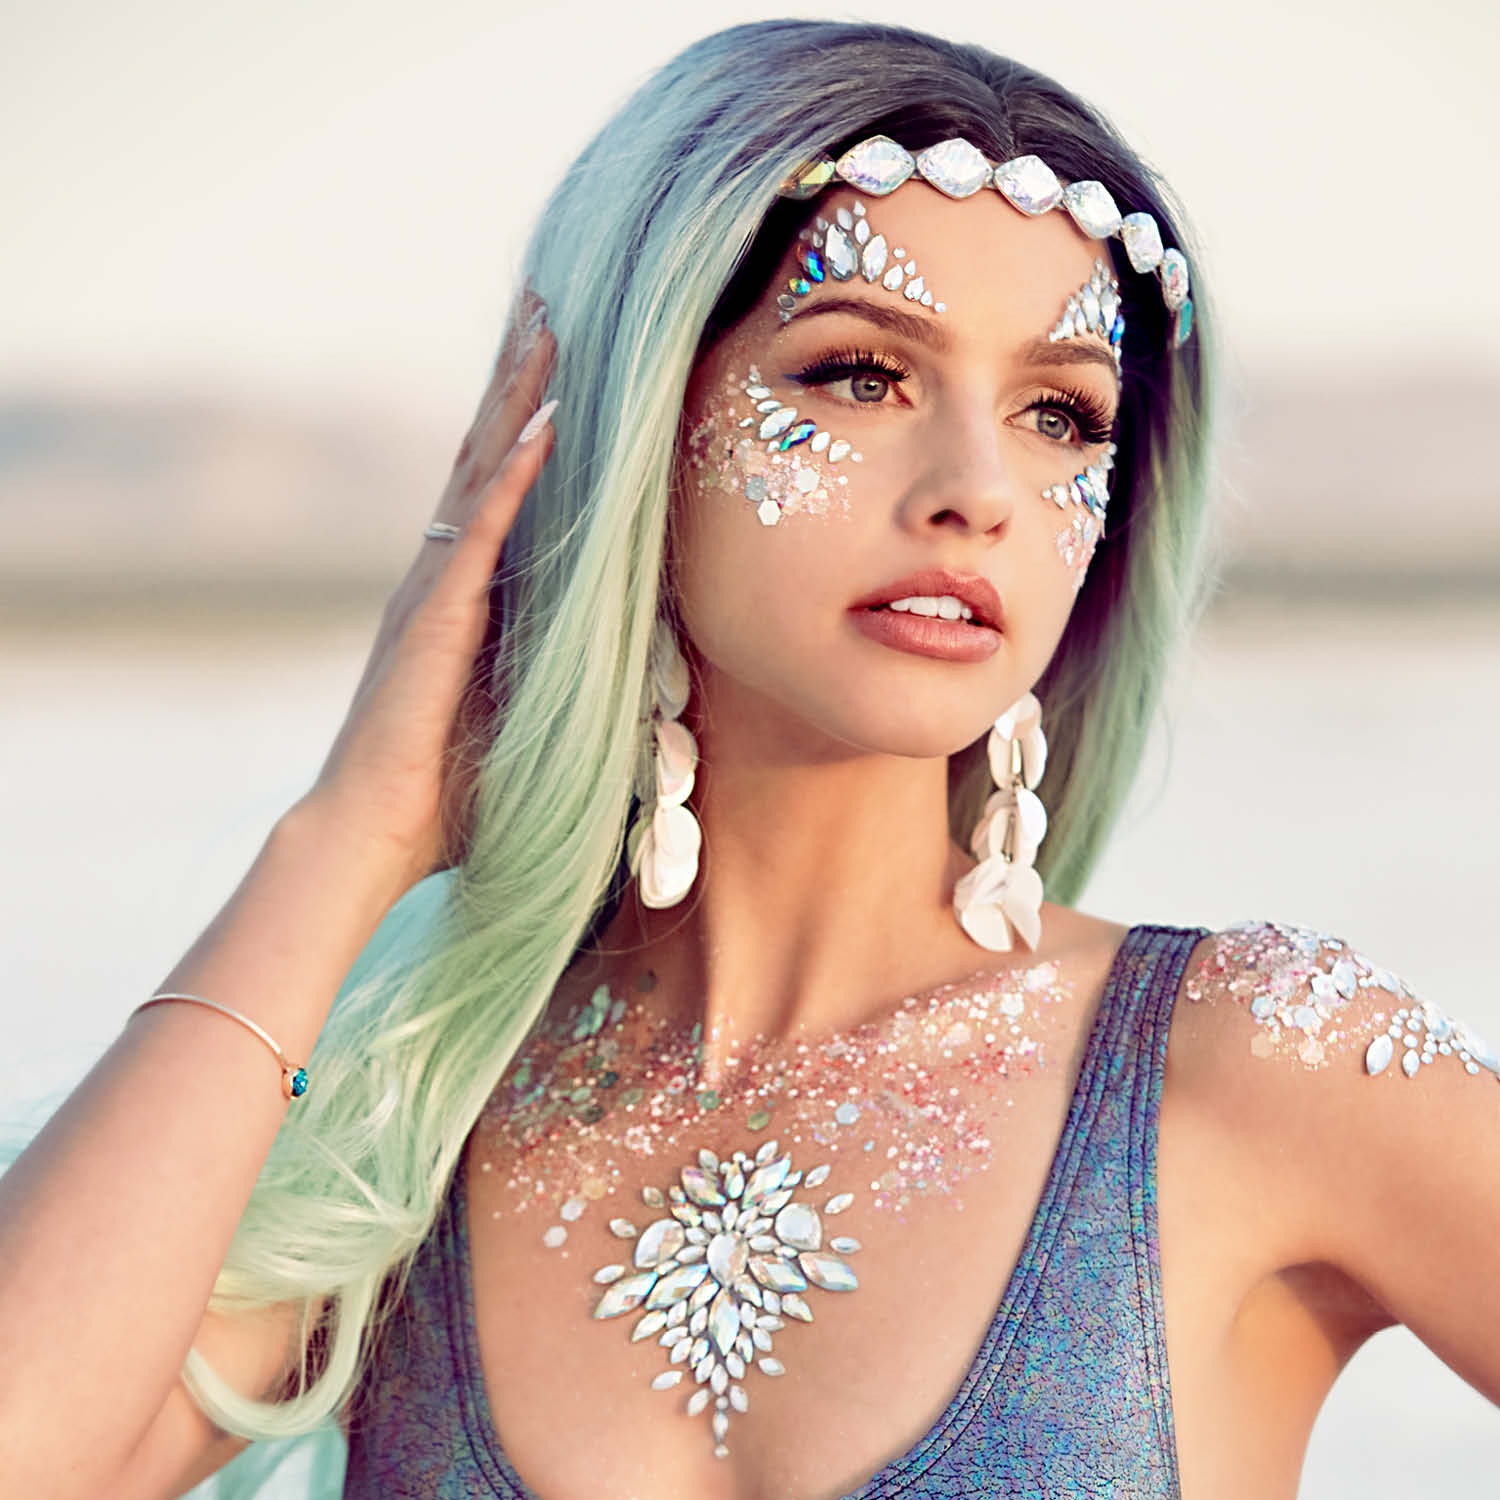 Get the Mermaid look with @marooshk - Claire's Icing Blog1500 x 1500